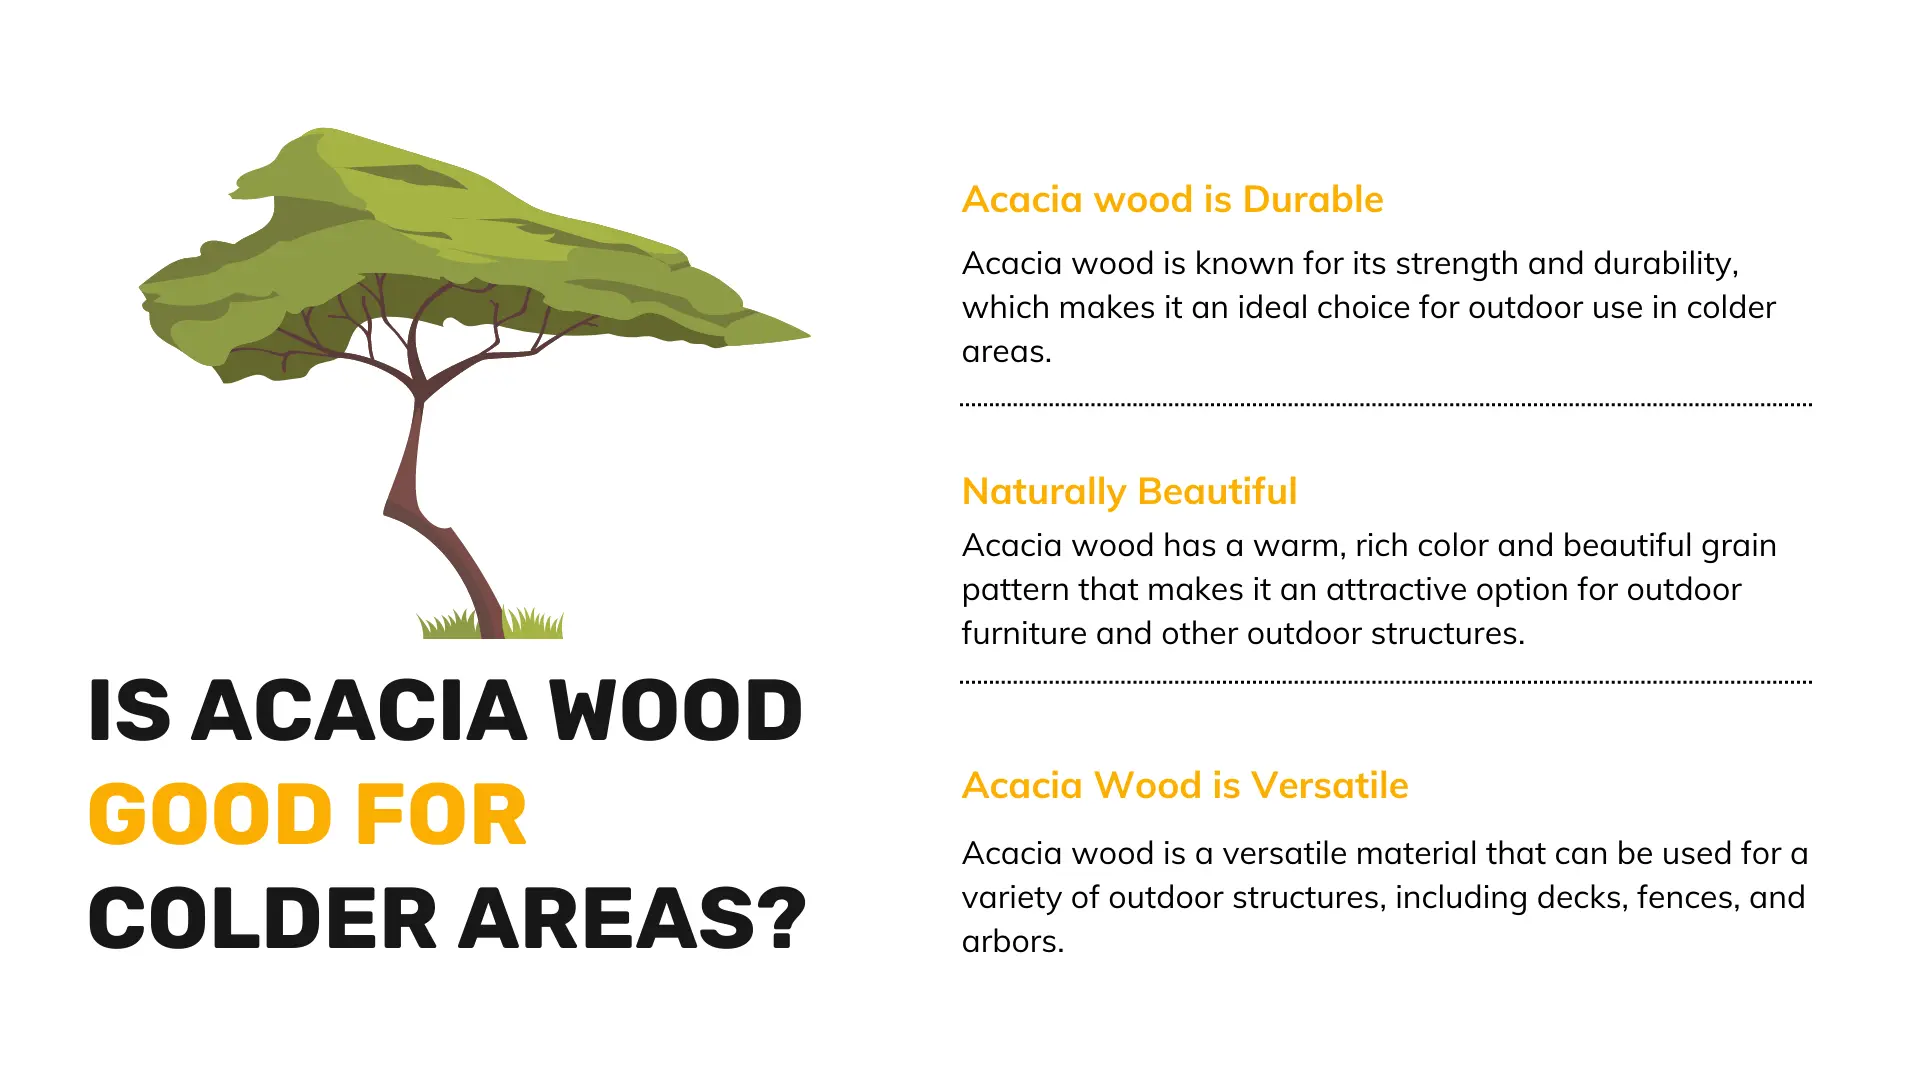 Is Acacia Wood good for Colder Areas